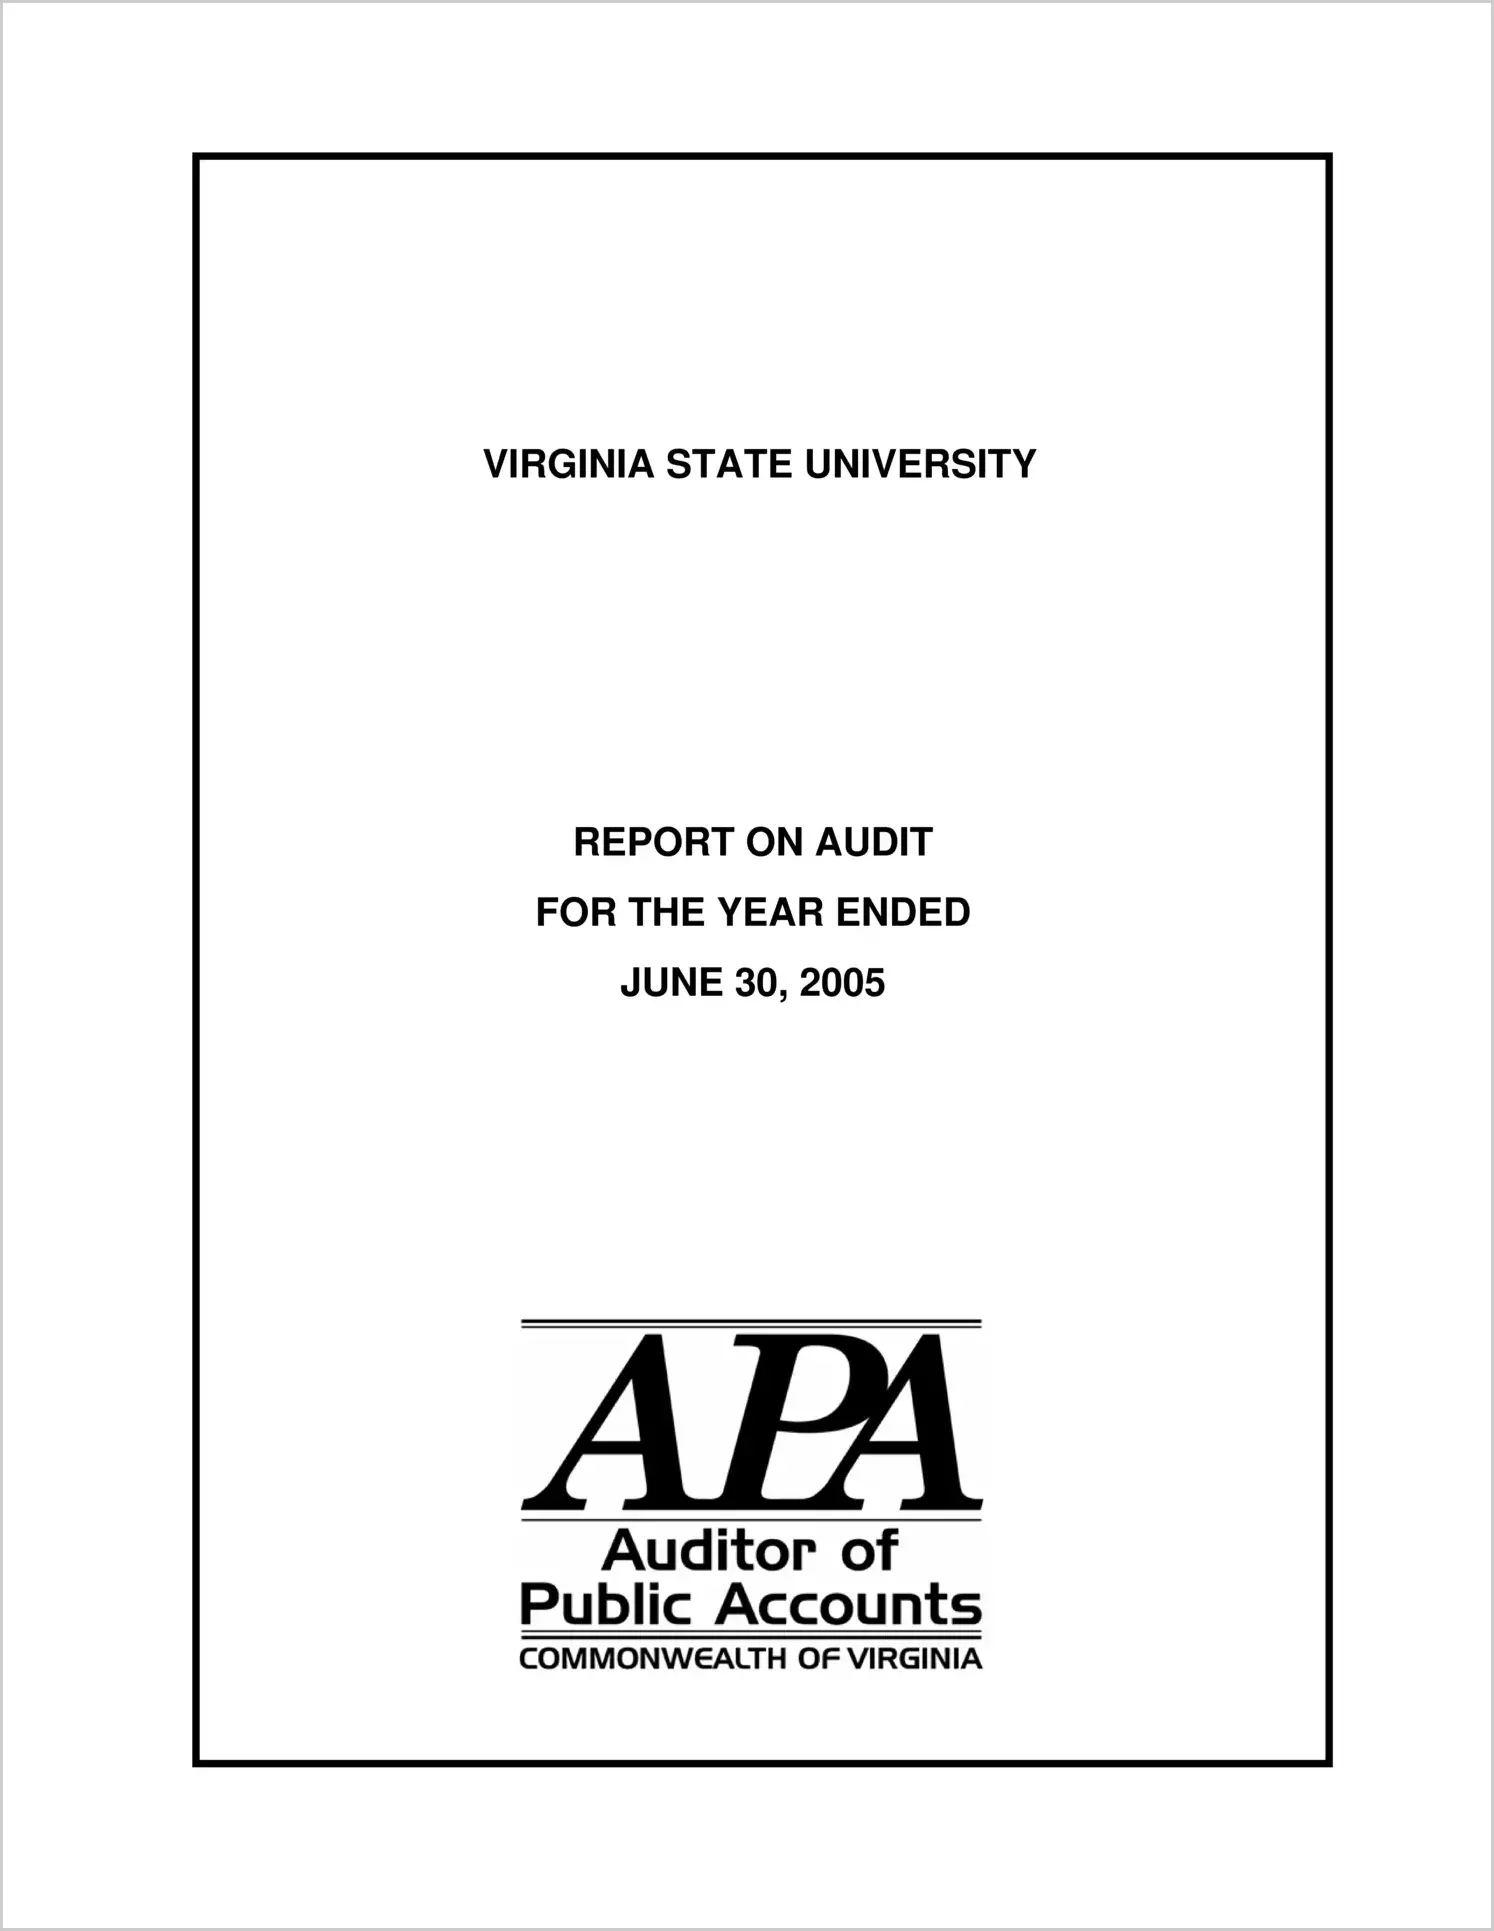 Virginia State University for the year ended June 30, 2005